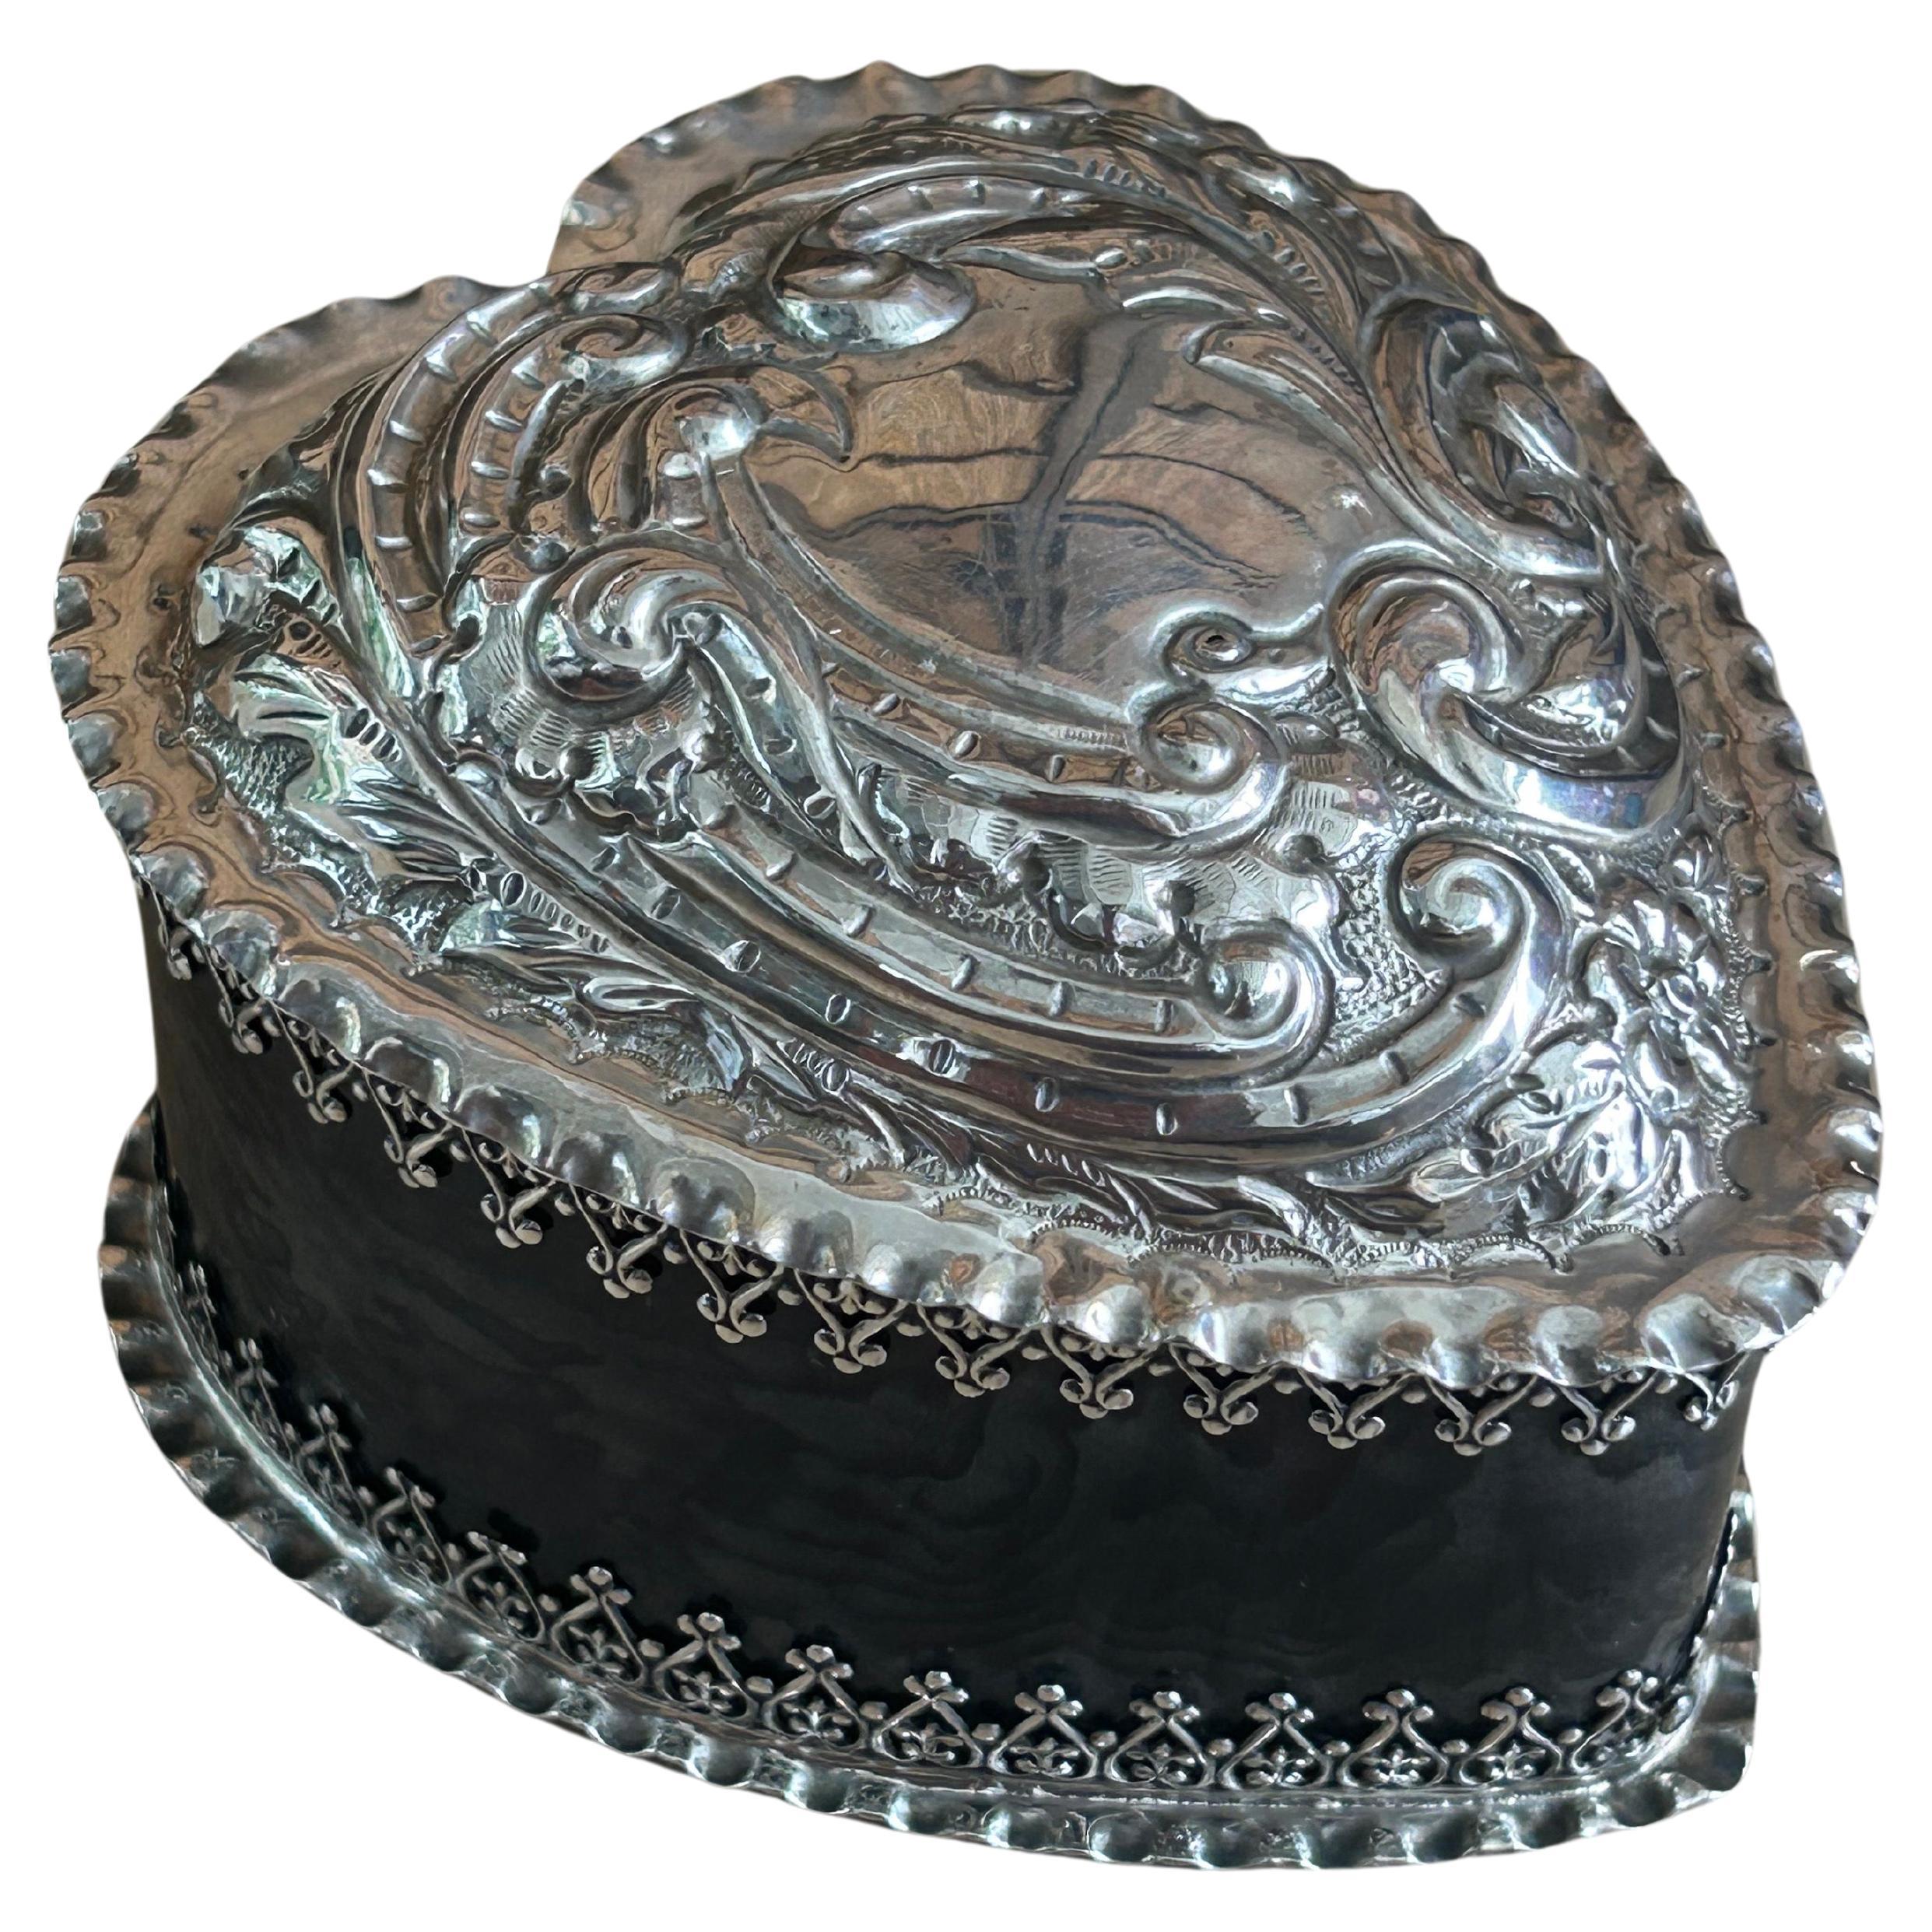 1893 Silver And Tortoiseshell Heart Shaped Box For Sale